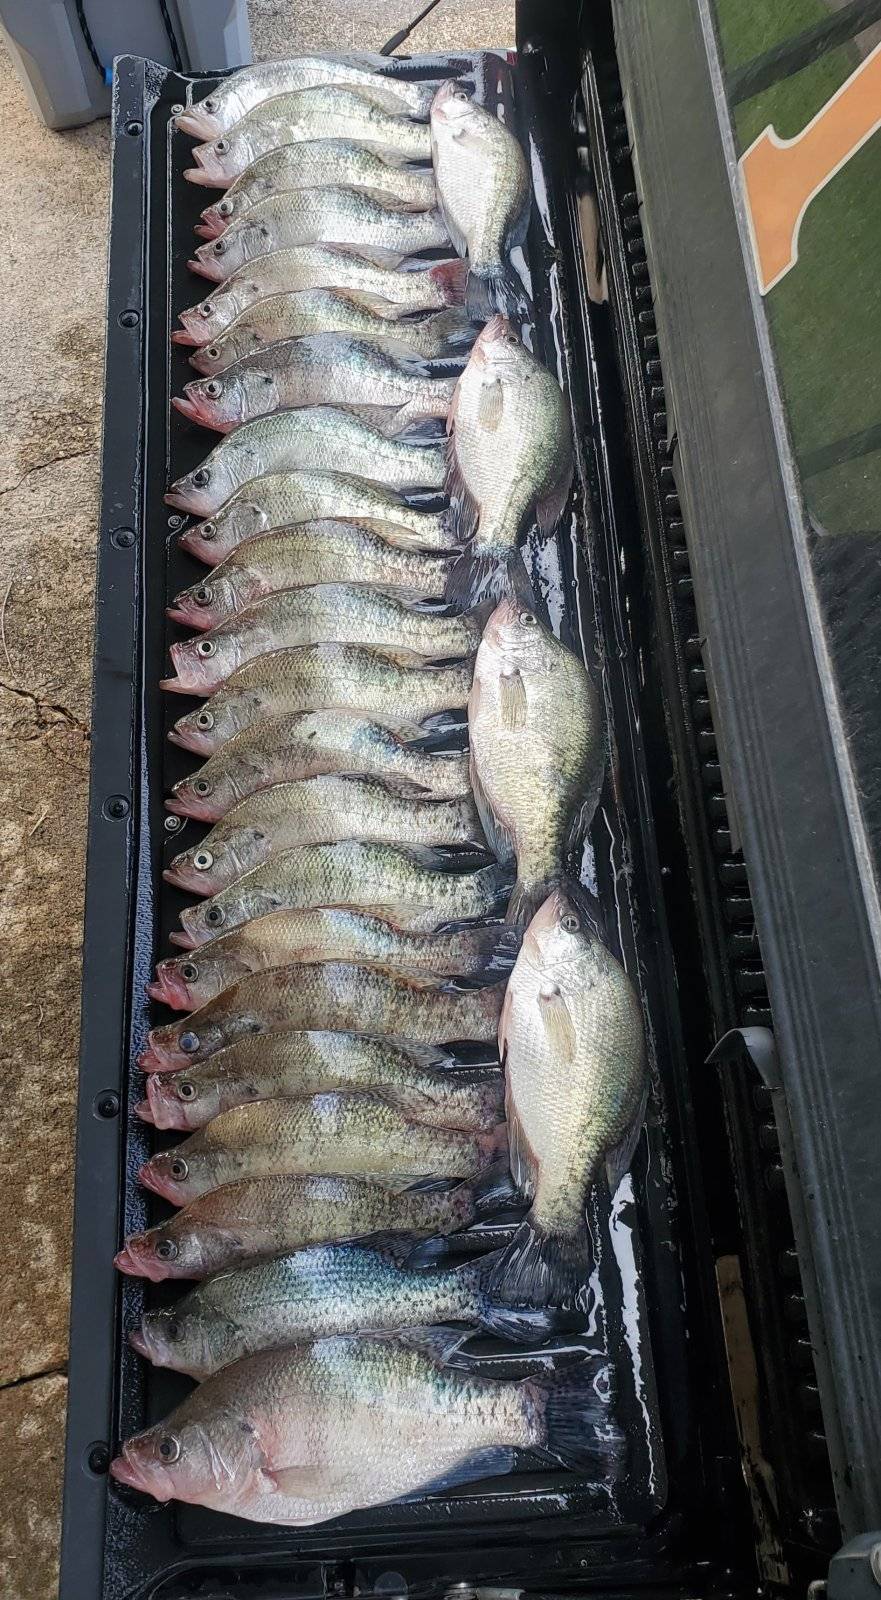 Open Water Suspended Crappie  Tennessee Hunting & Fishing Forum